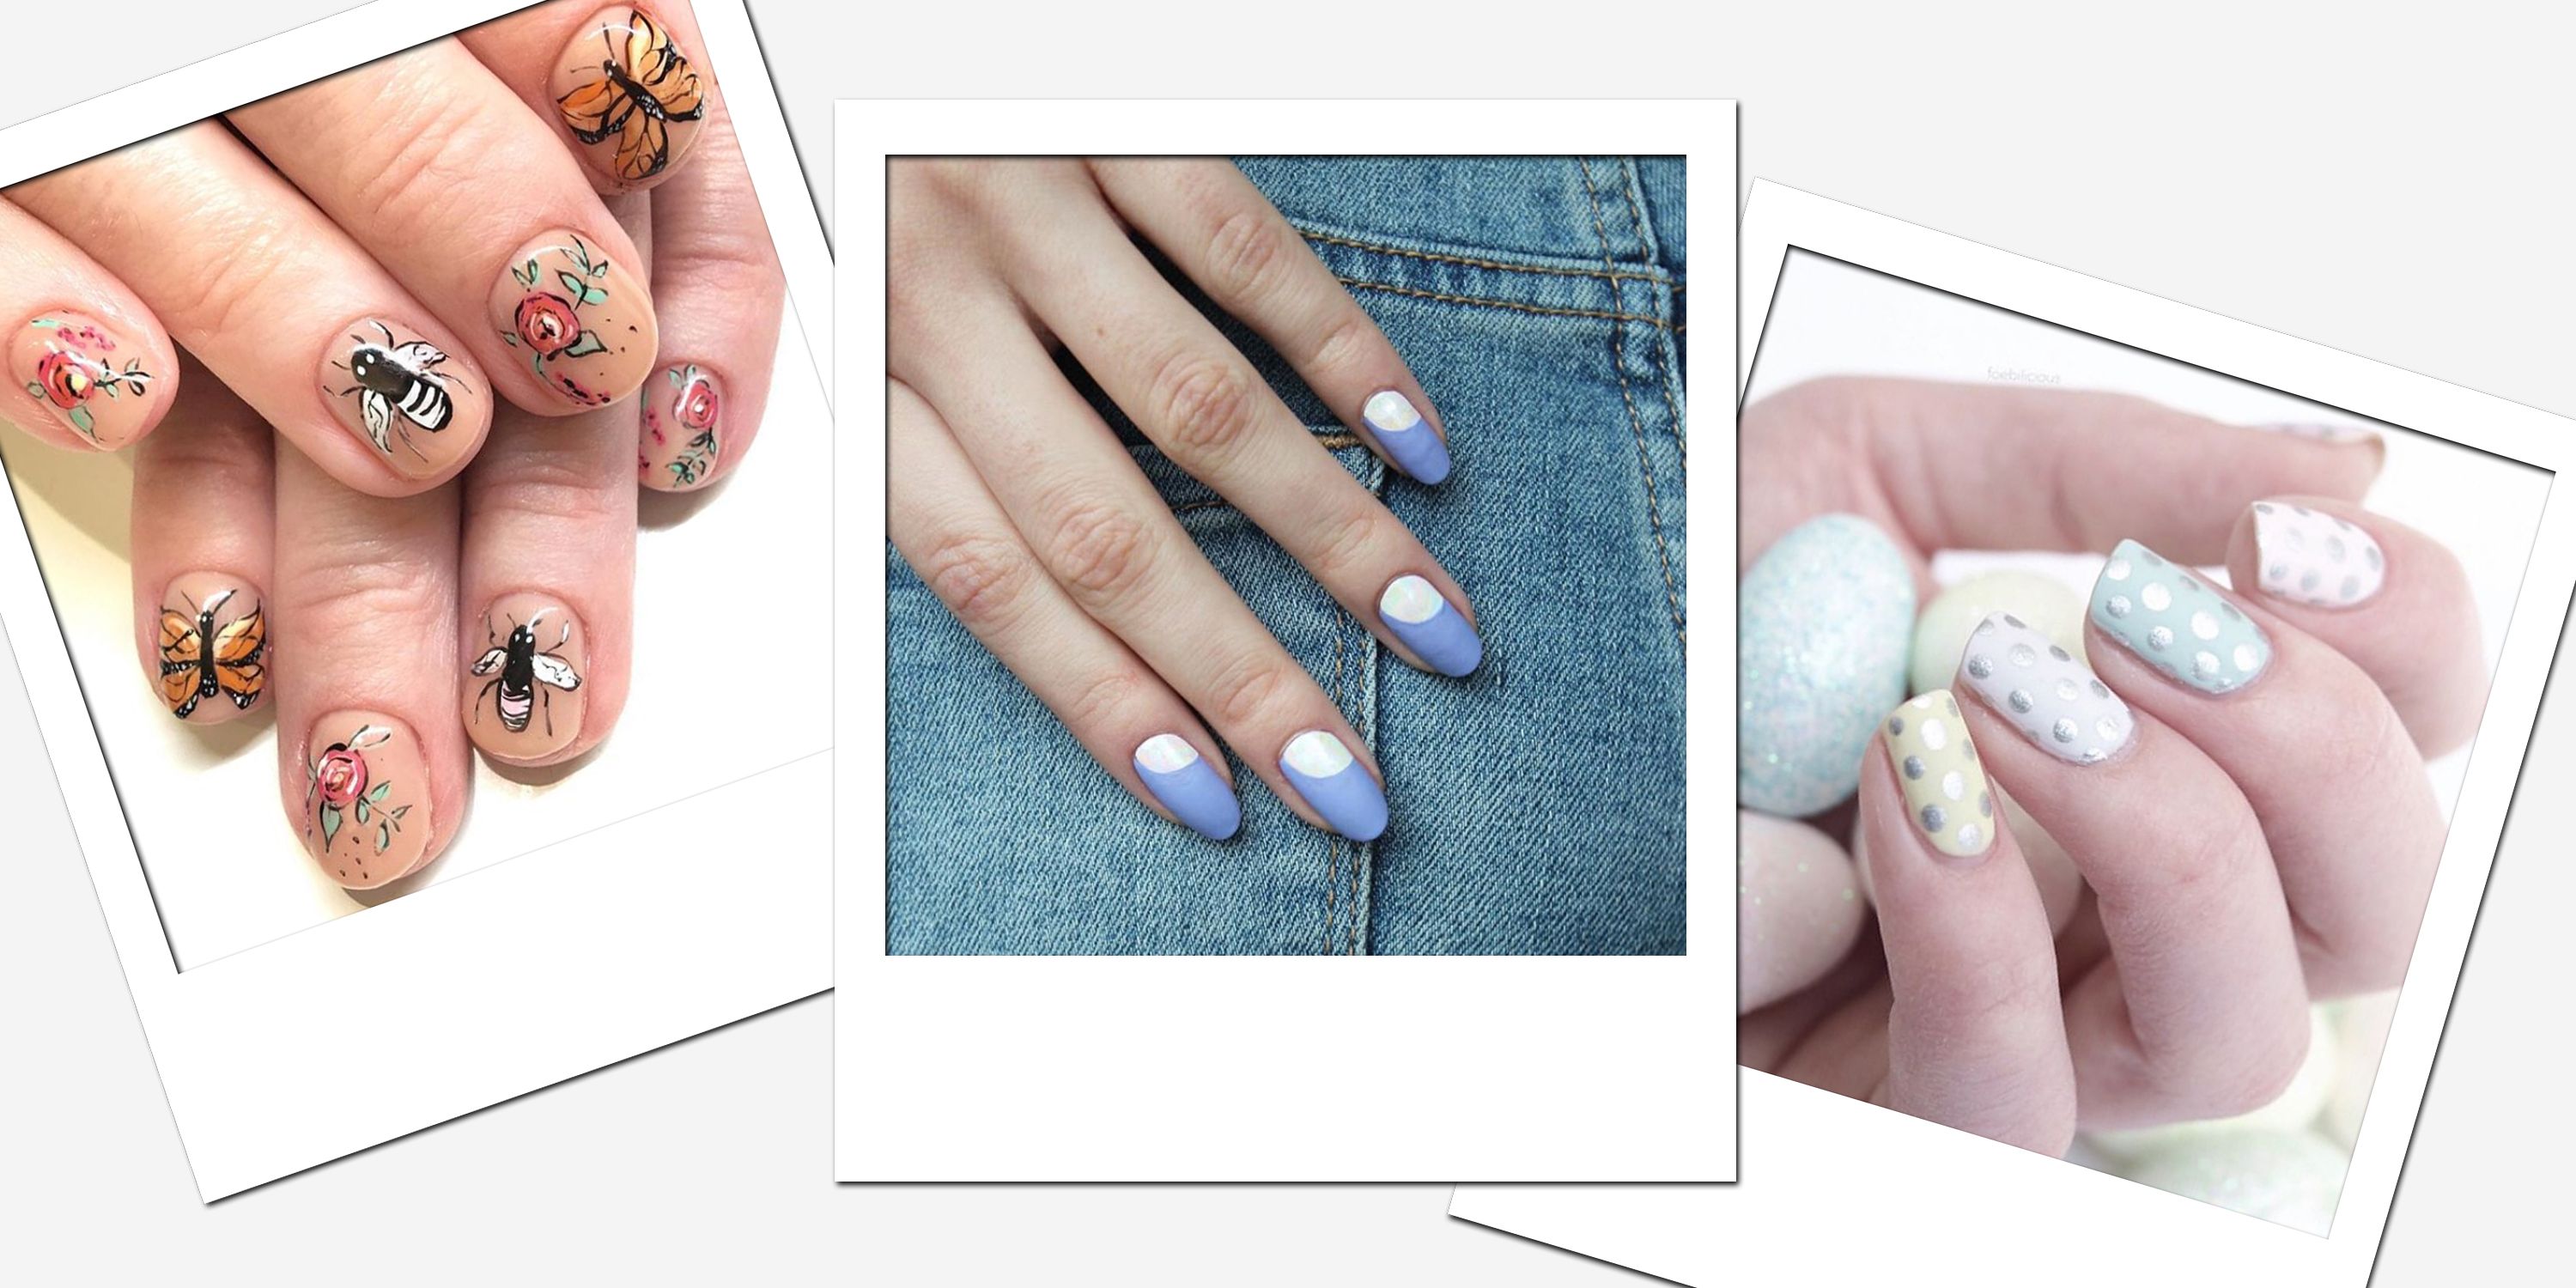 15 Nail Art Ideas For Easter 2019ß Best Easter Manicure Designs